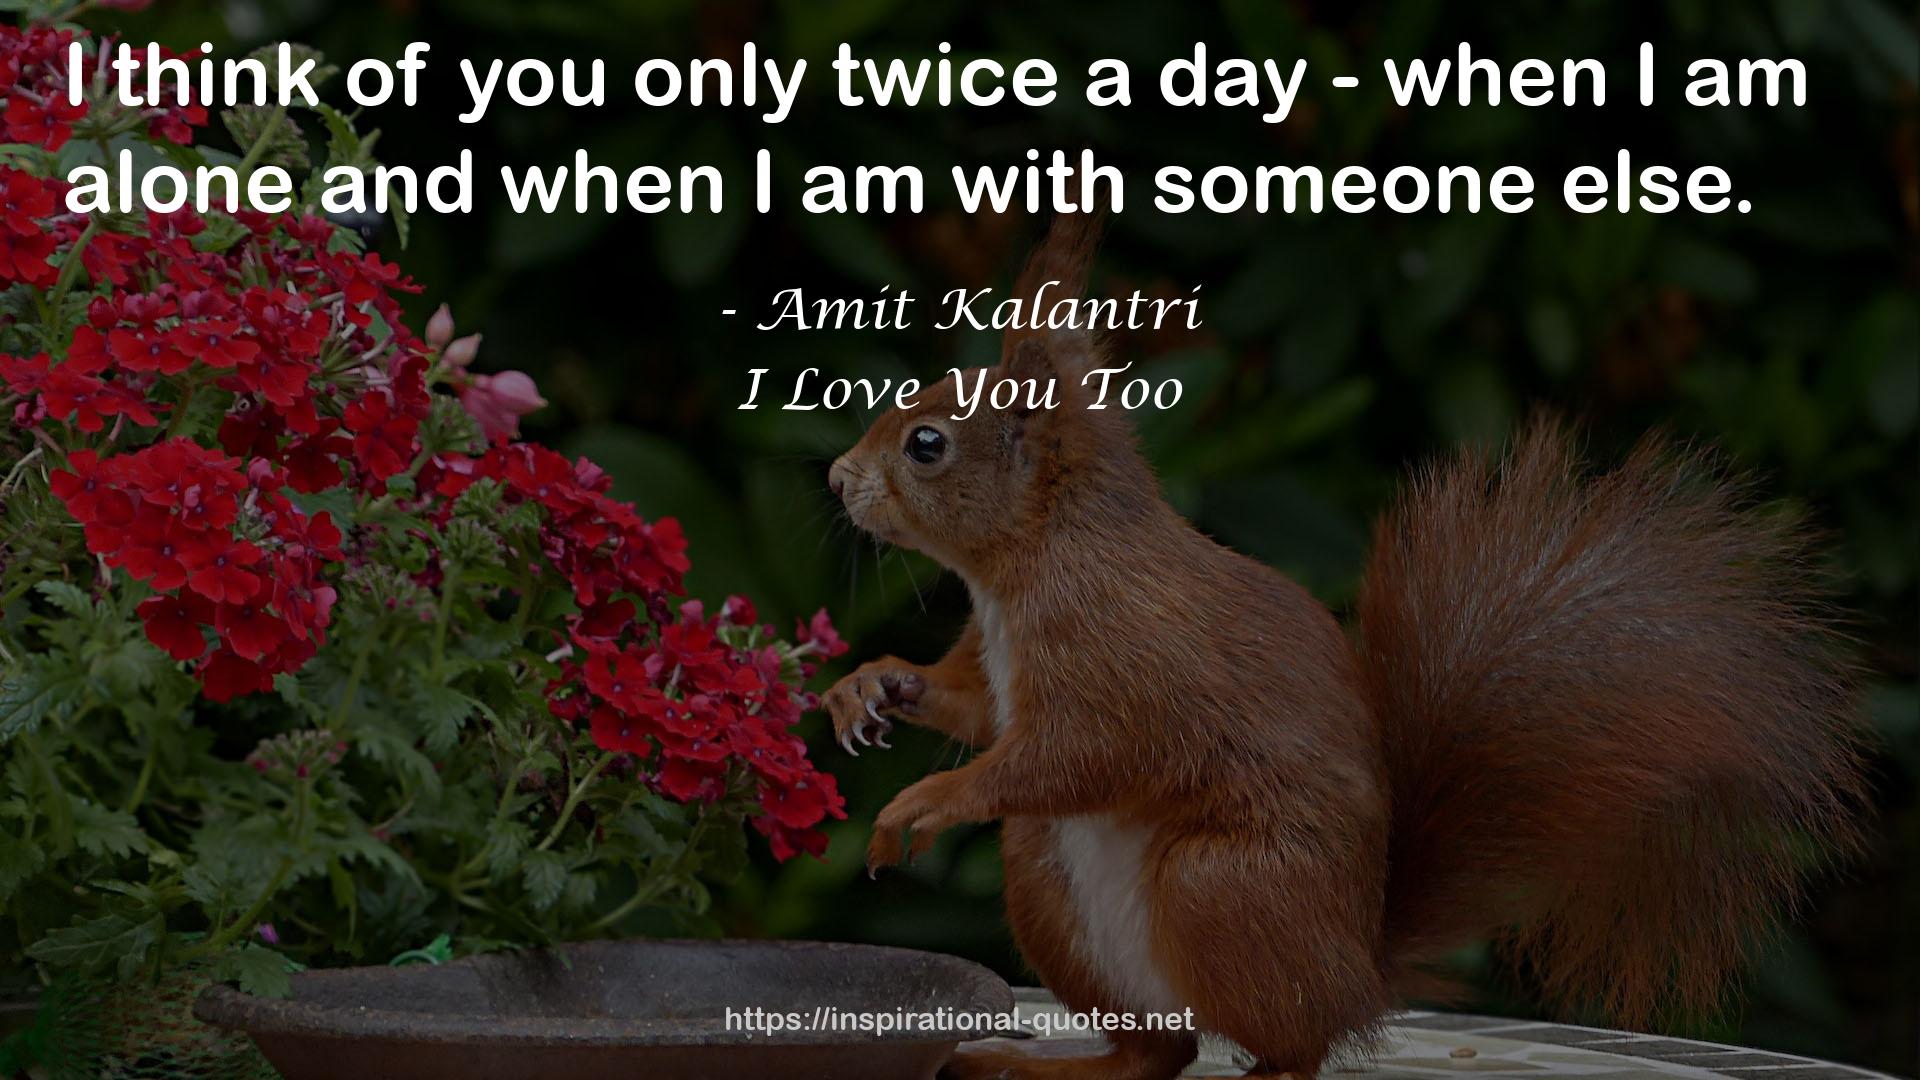 I Love You Too QUOTES